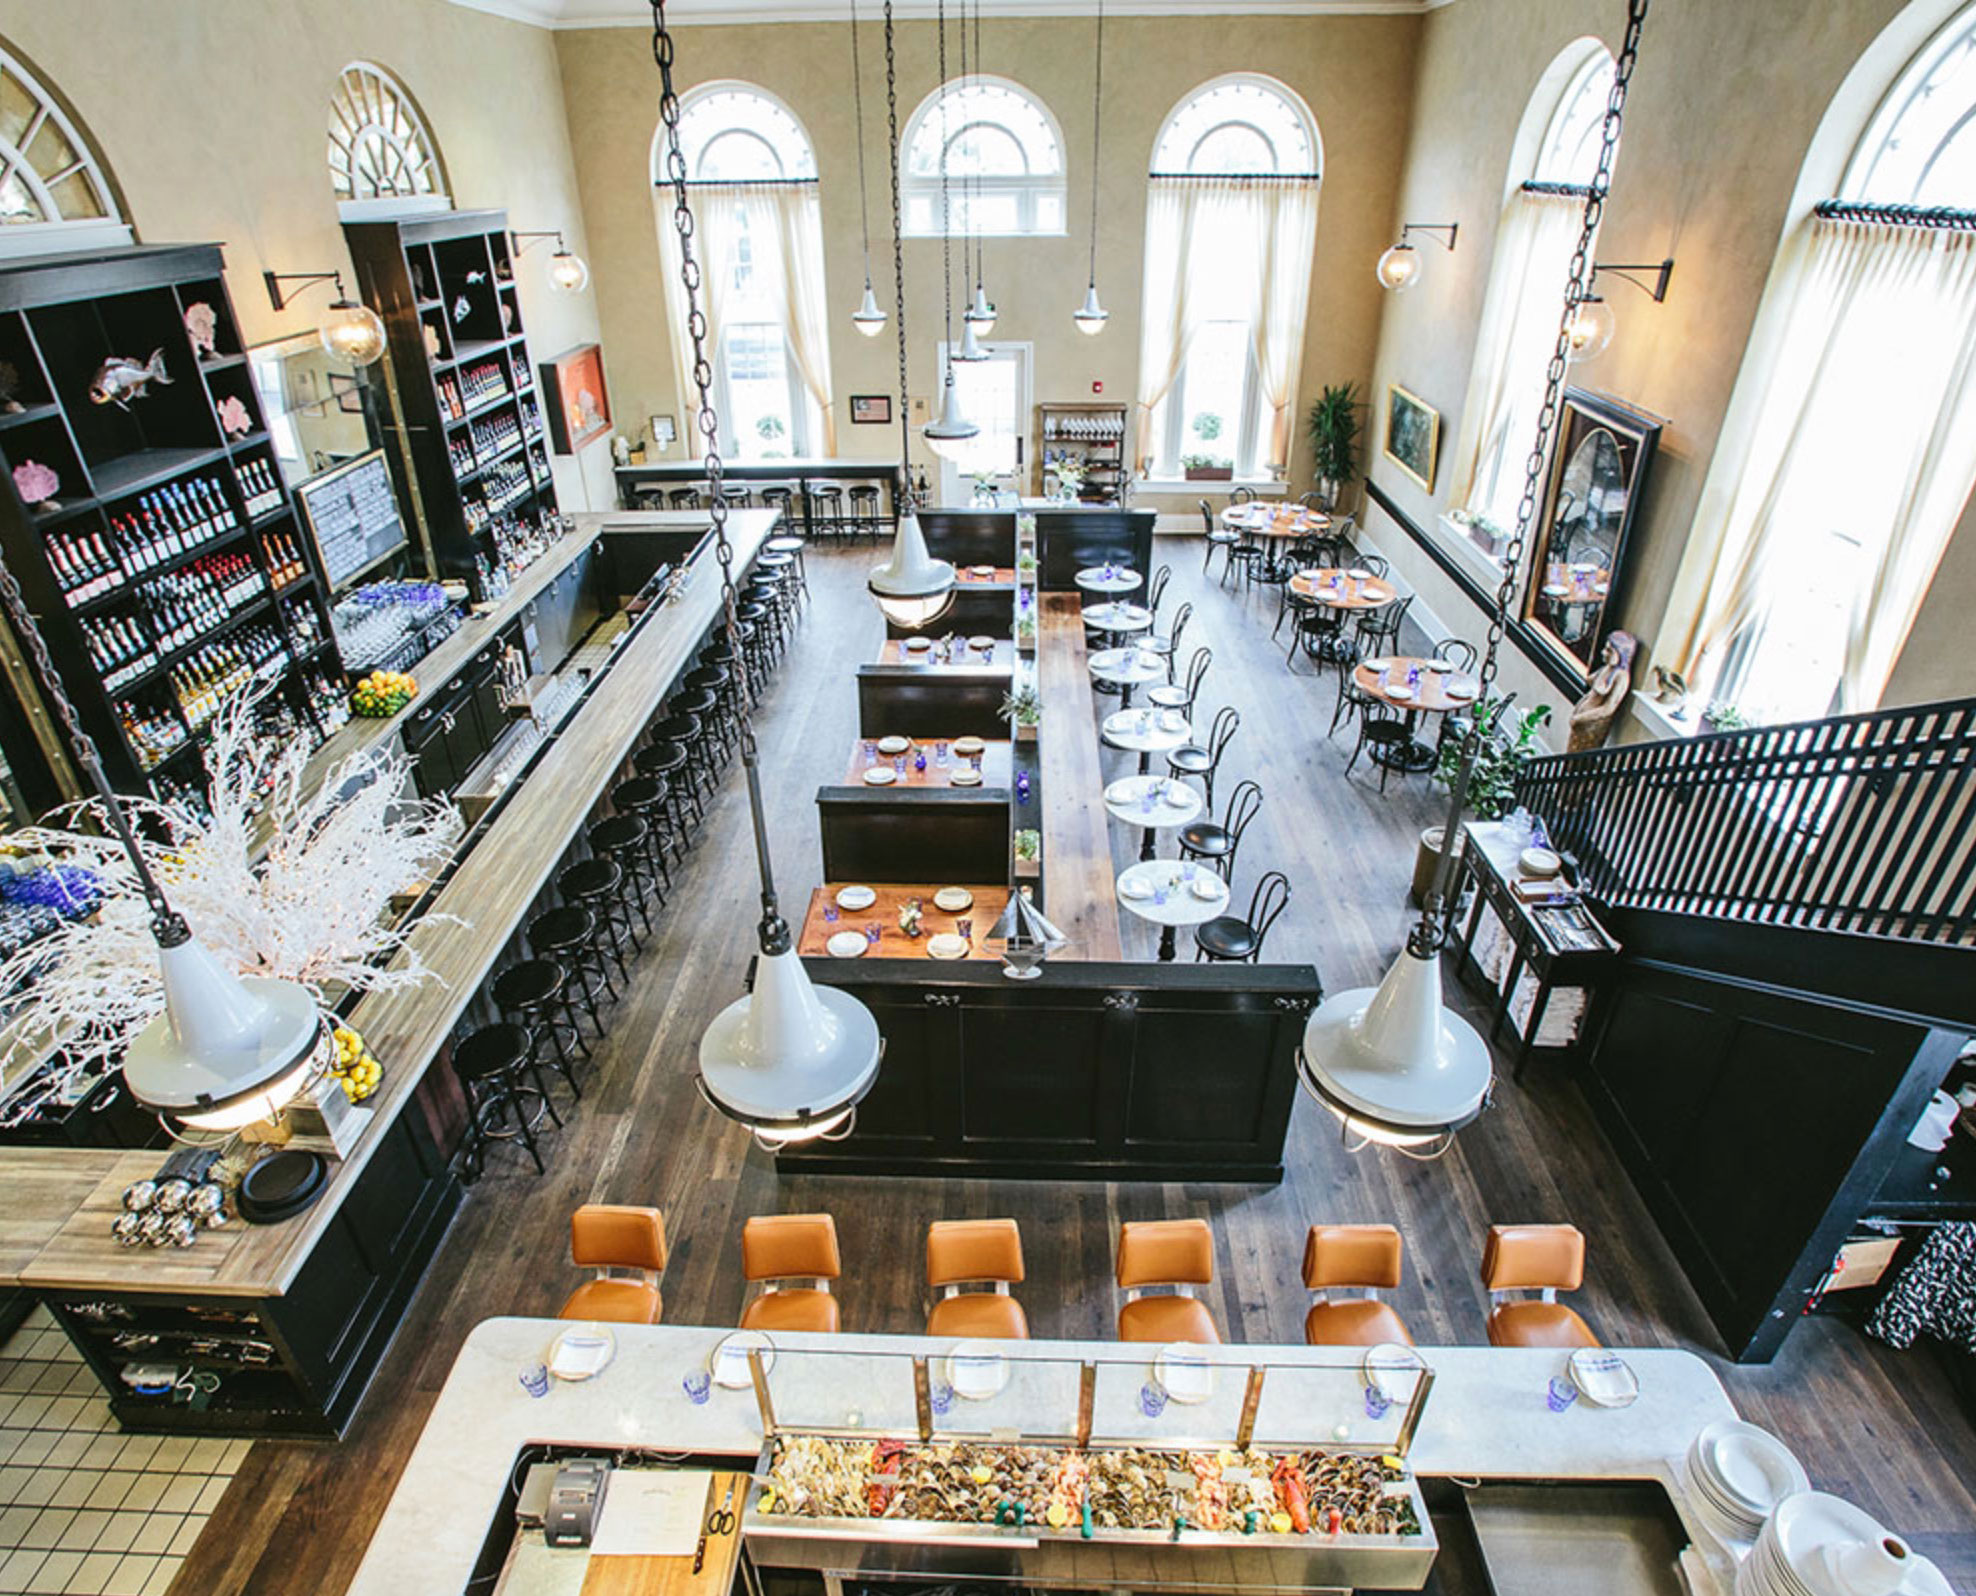 The Ordinary, Charleston - recommended in Where Chefs Eat